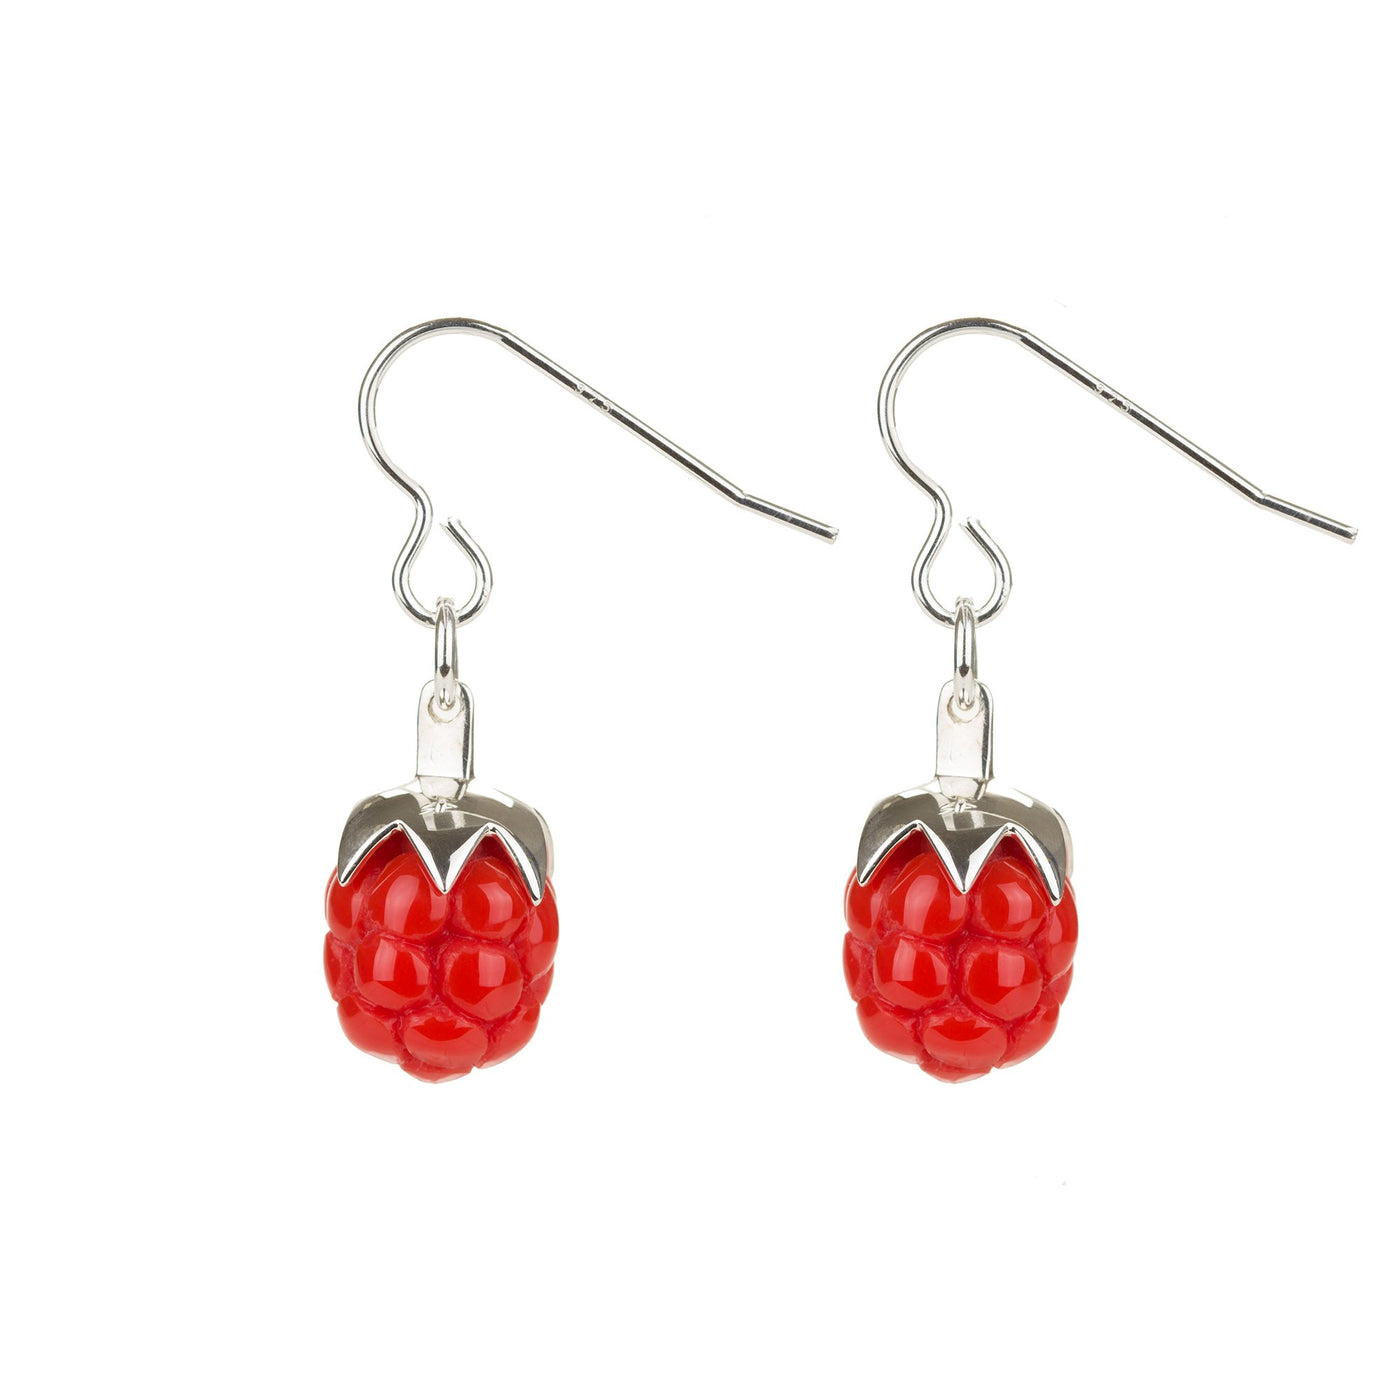 Tina Lilienthal Raspberry Earrings